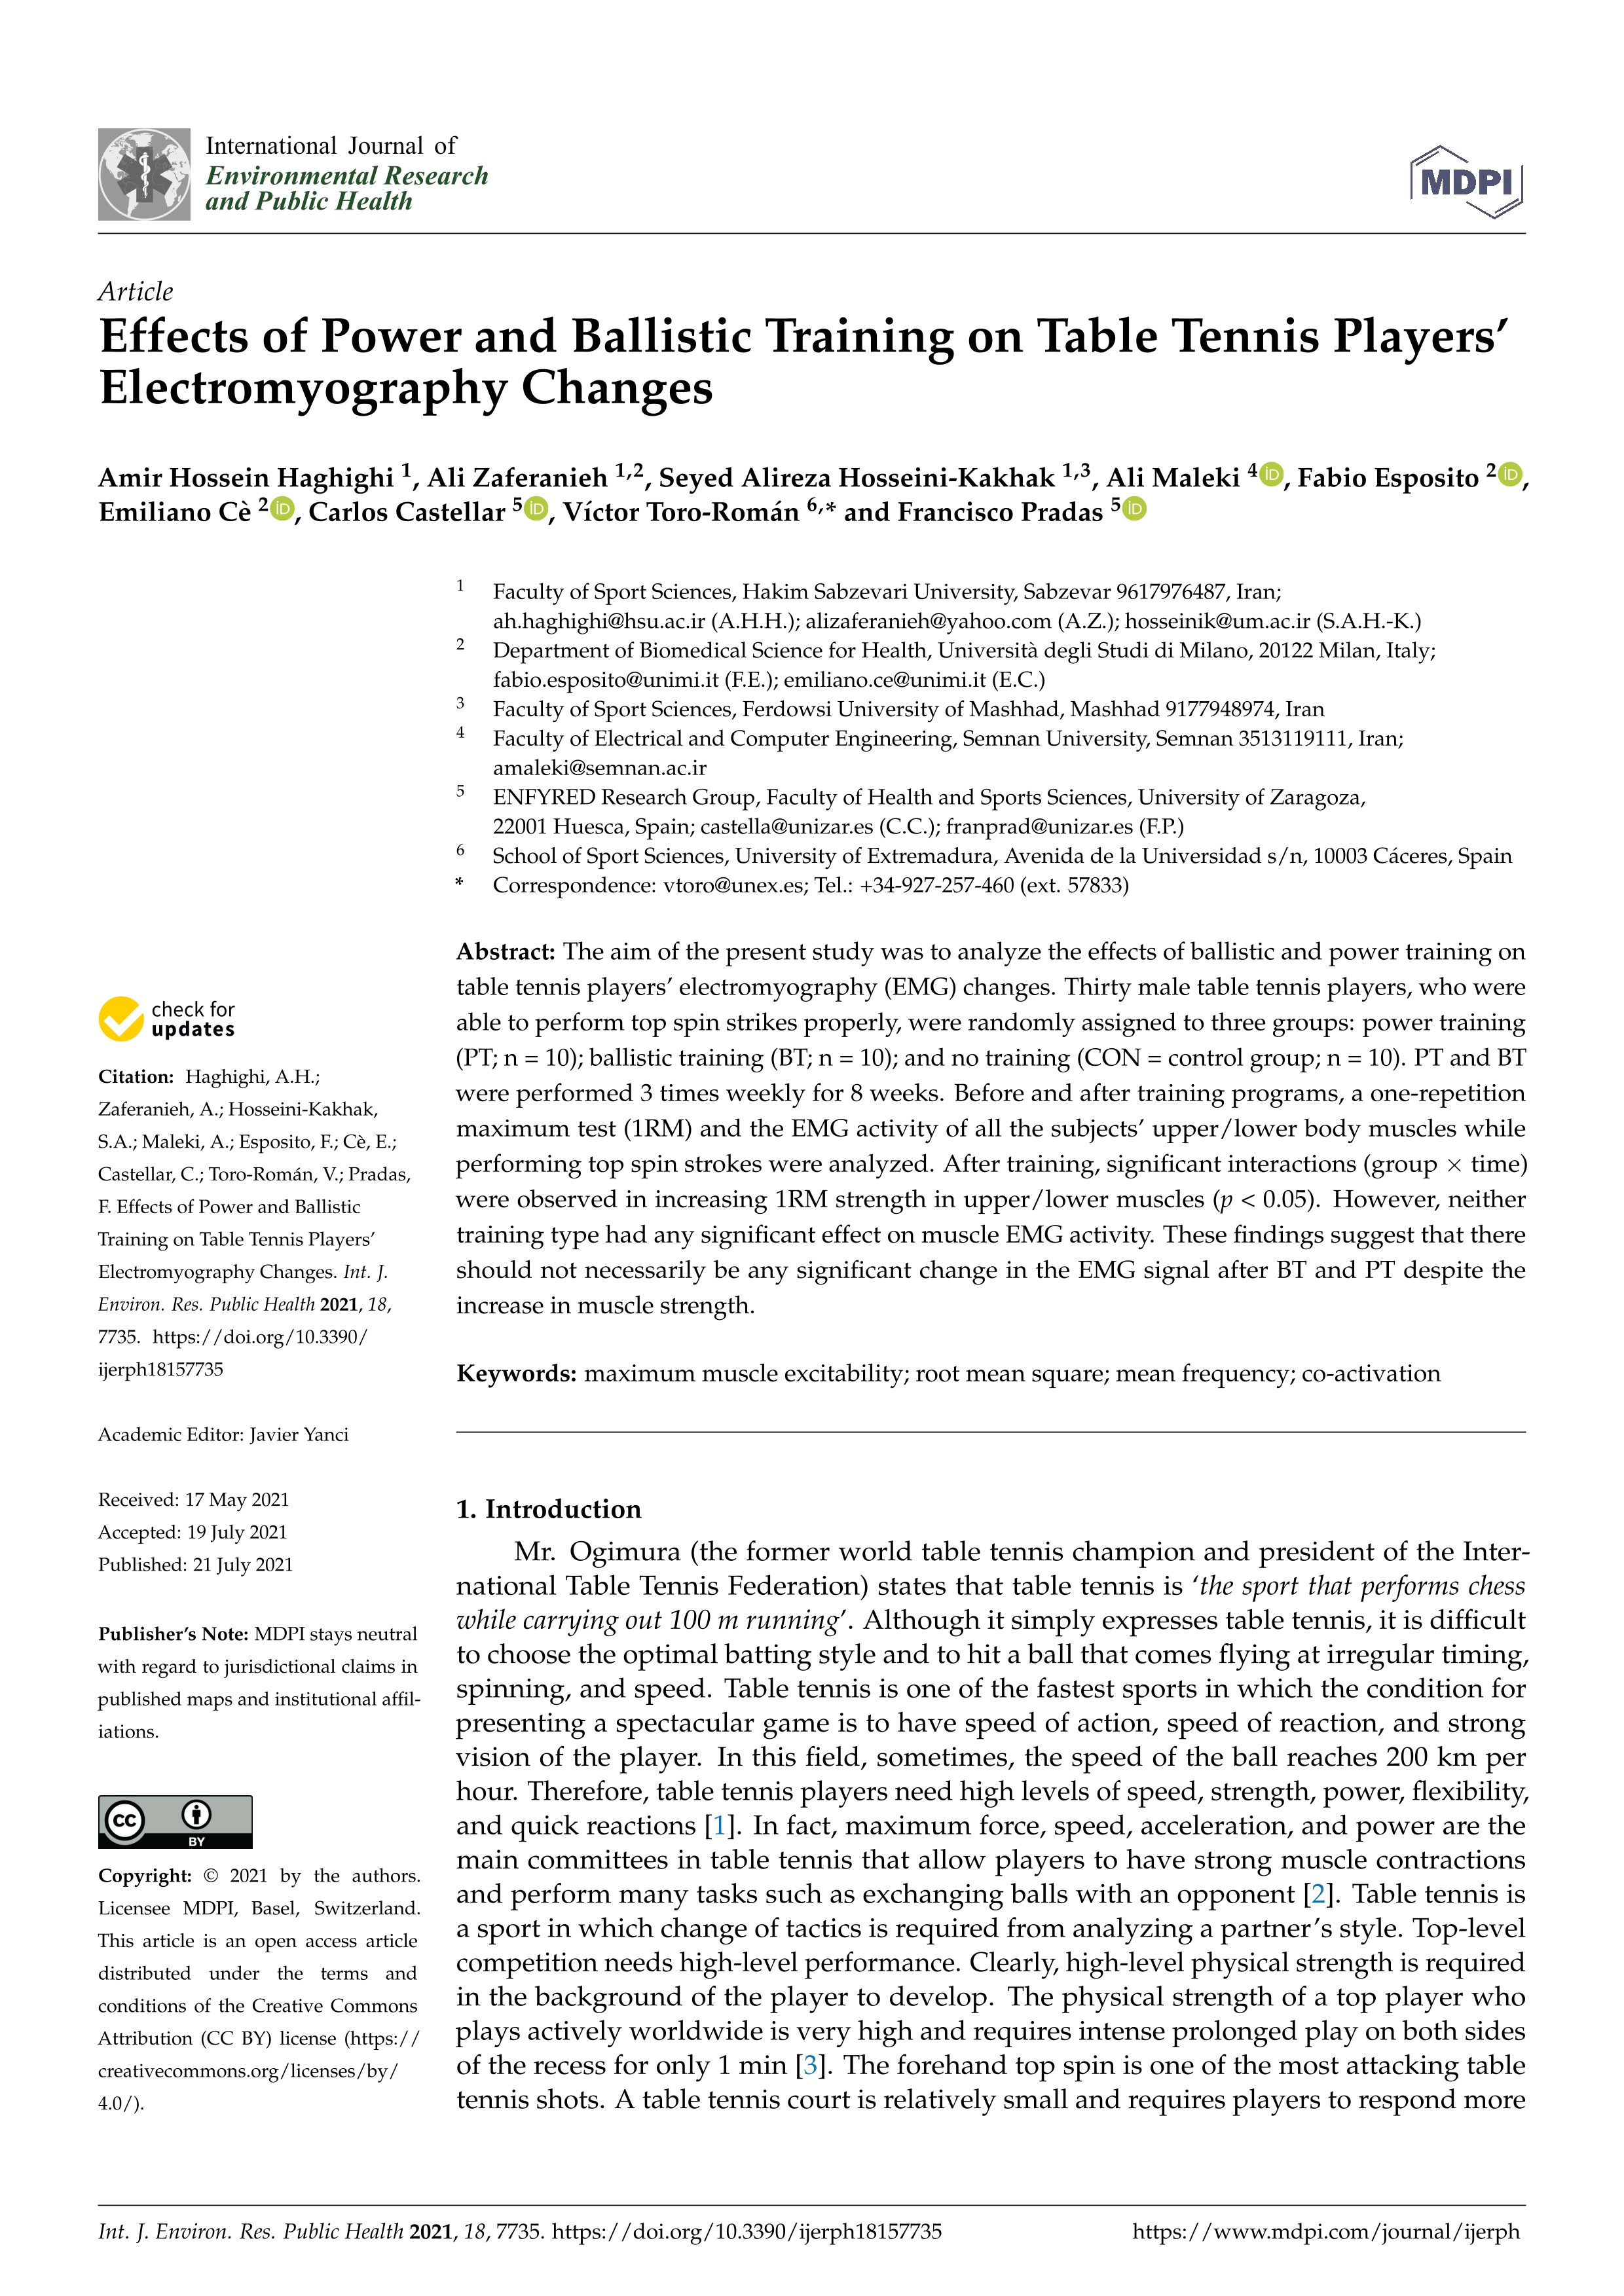 Effects of power and ballistic training on table tennis players’ electromyography changes